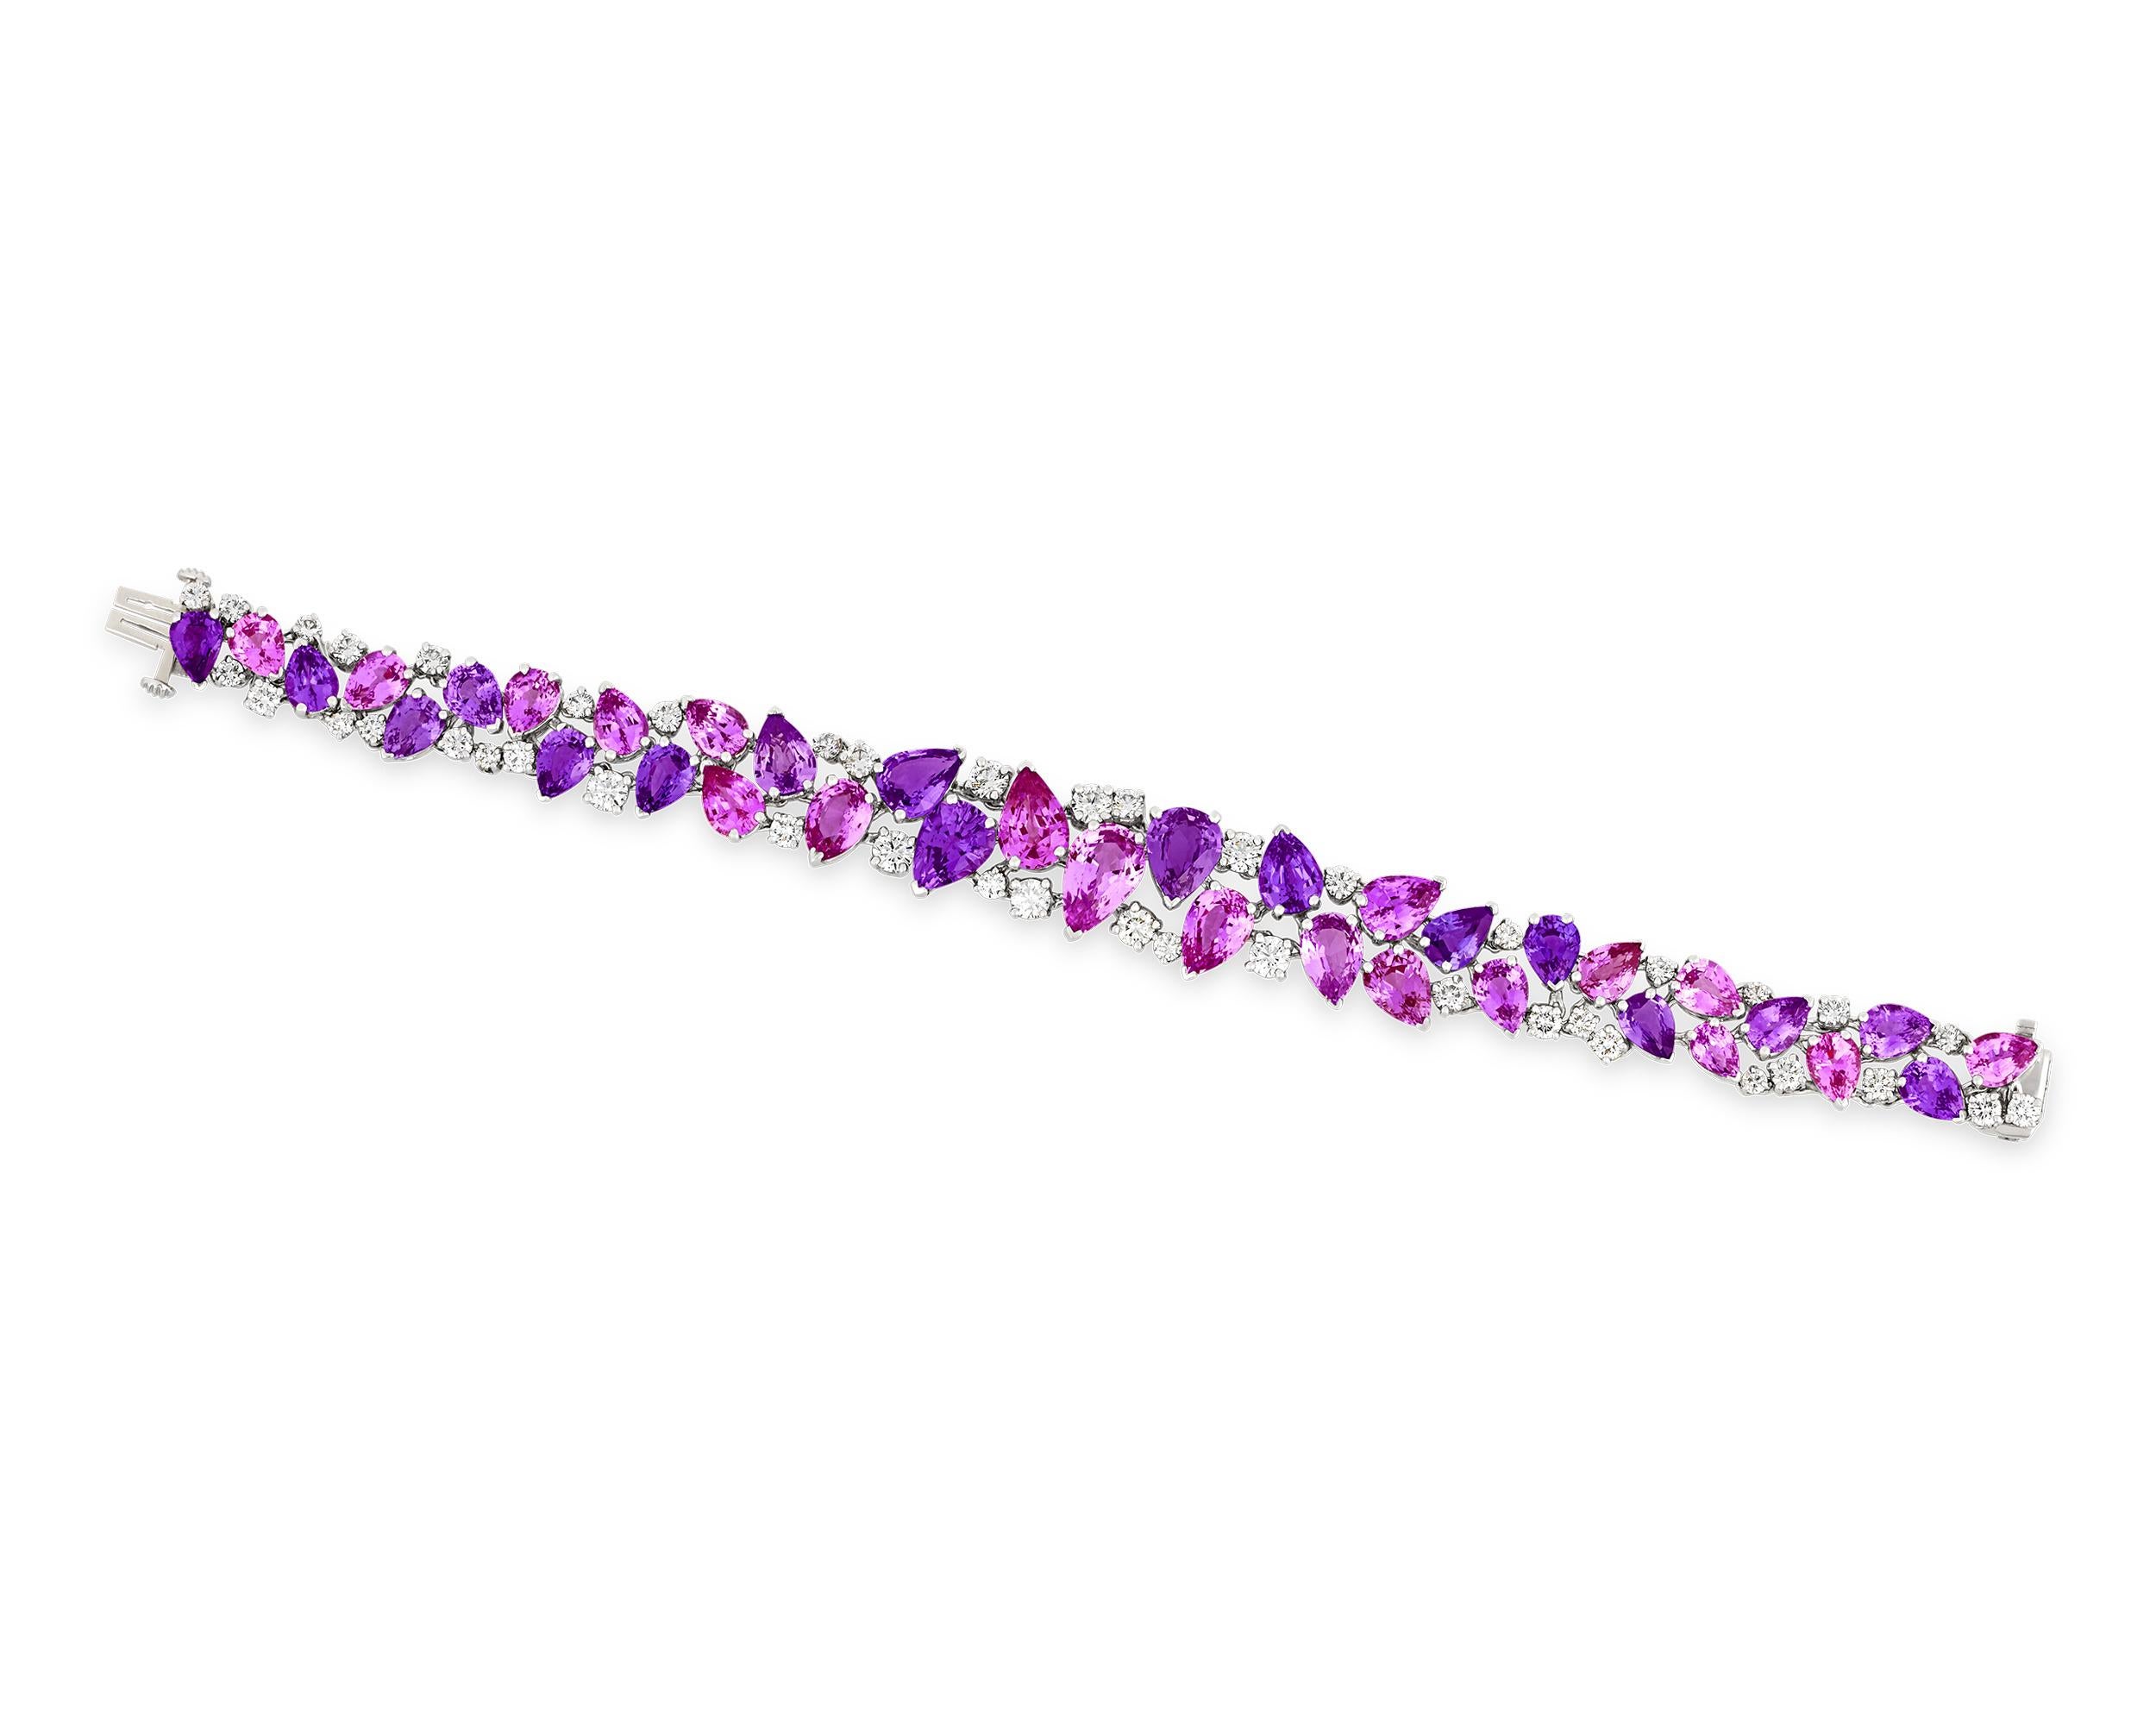 Crafted by the revered American jeweler Oscar Heyman, this bracelet features thirty-six perfectly matched pear-shaped pink and purple sapphires. The romantic gems are certified by the Gemological Institute of America and GemResearch Swisslabs as